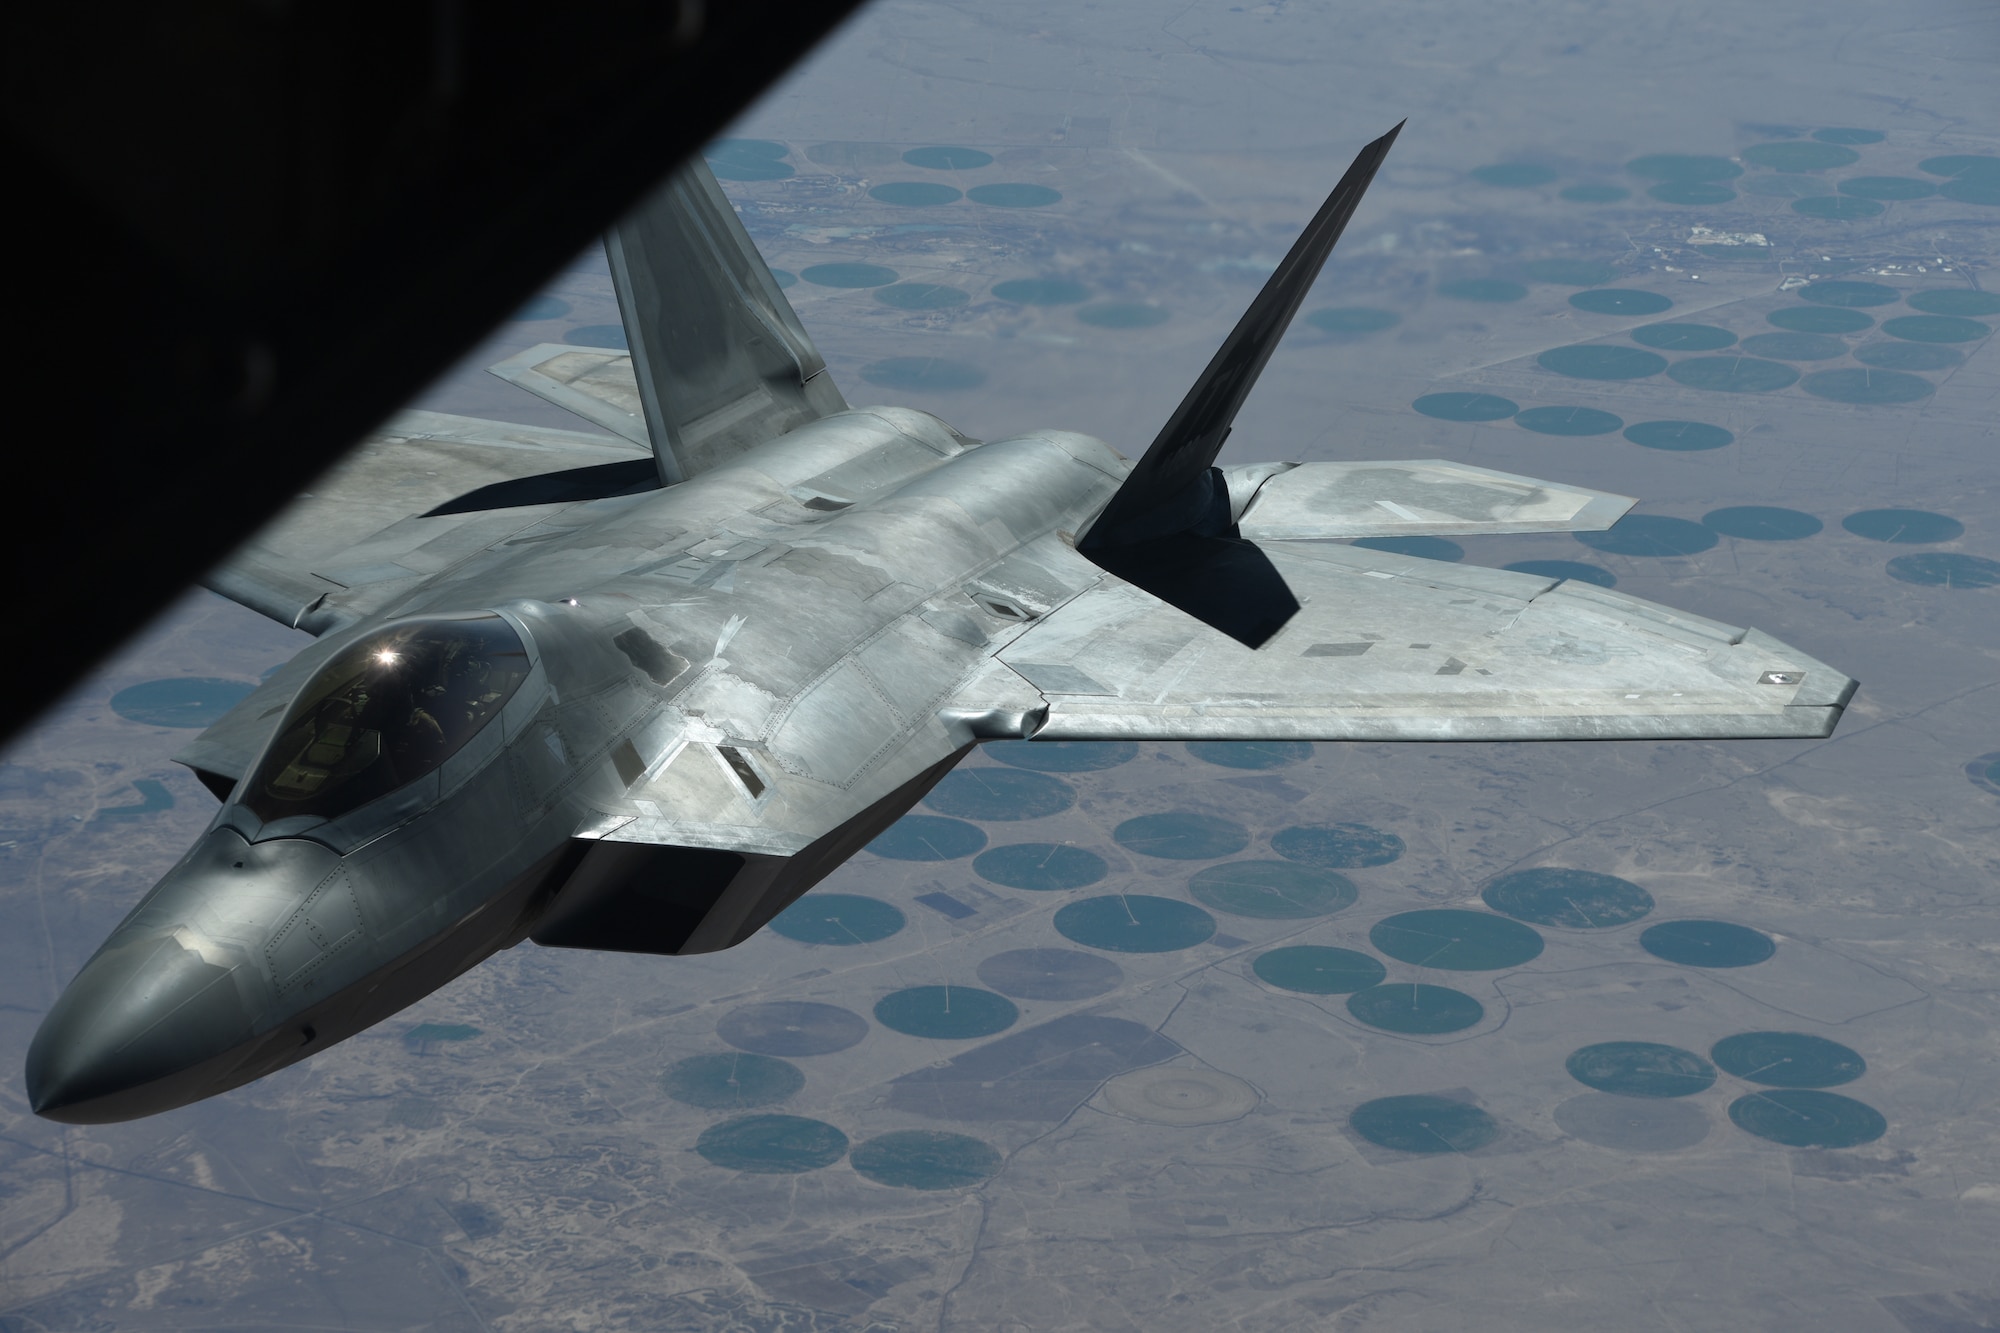 An U.S. Air Force F-22 Raptor departs after receiving fuel from a KC-10 Extender during a mission in support of Operation Inherent Resolve over Syria, Feb. 2, 2018. The F-22's characteristics provide a synergistic effect that ensures F-22 lethality against all advanced air threats. (U.S. Air National Guard photo by Staff Sgt. Colton Elliott)